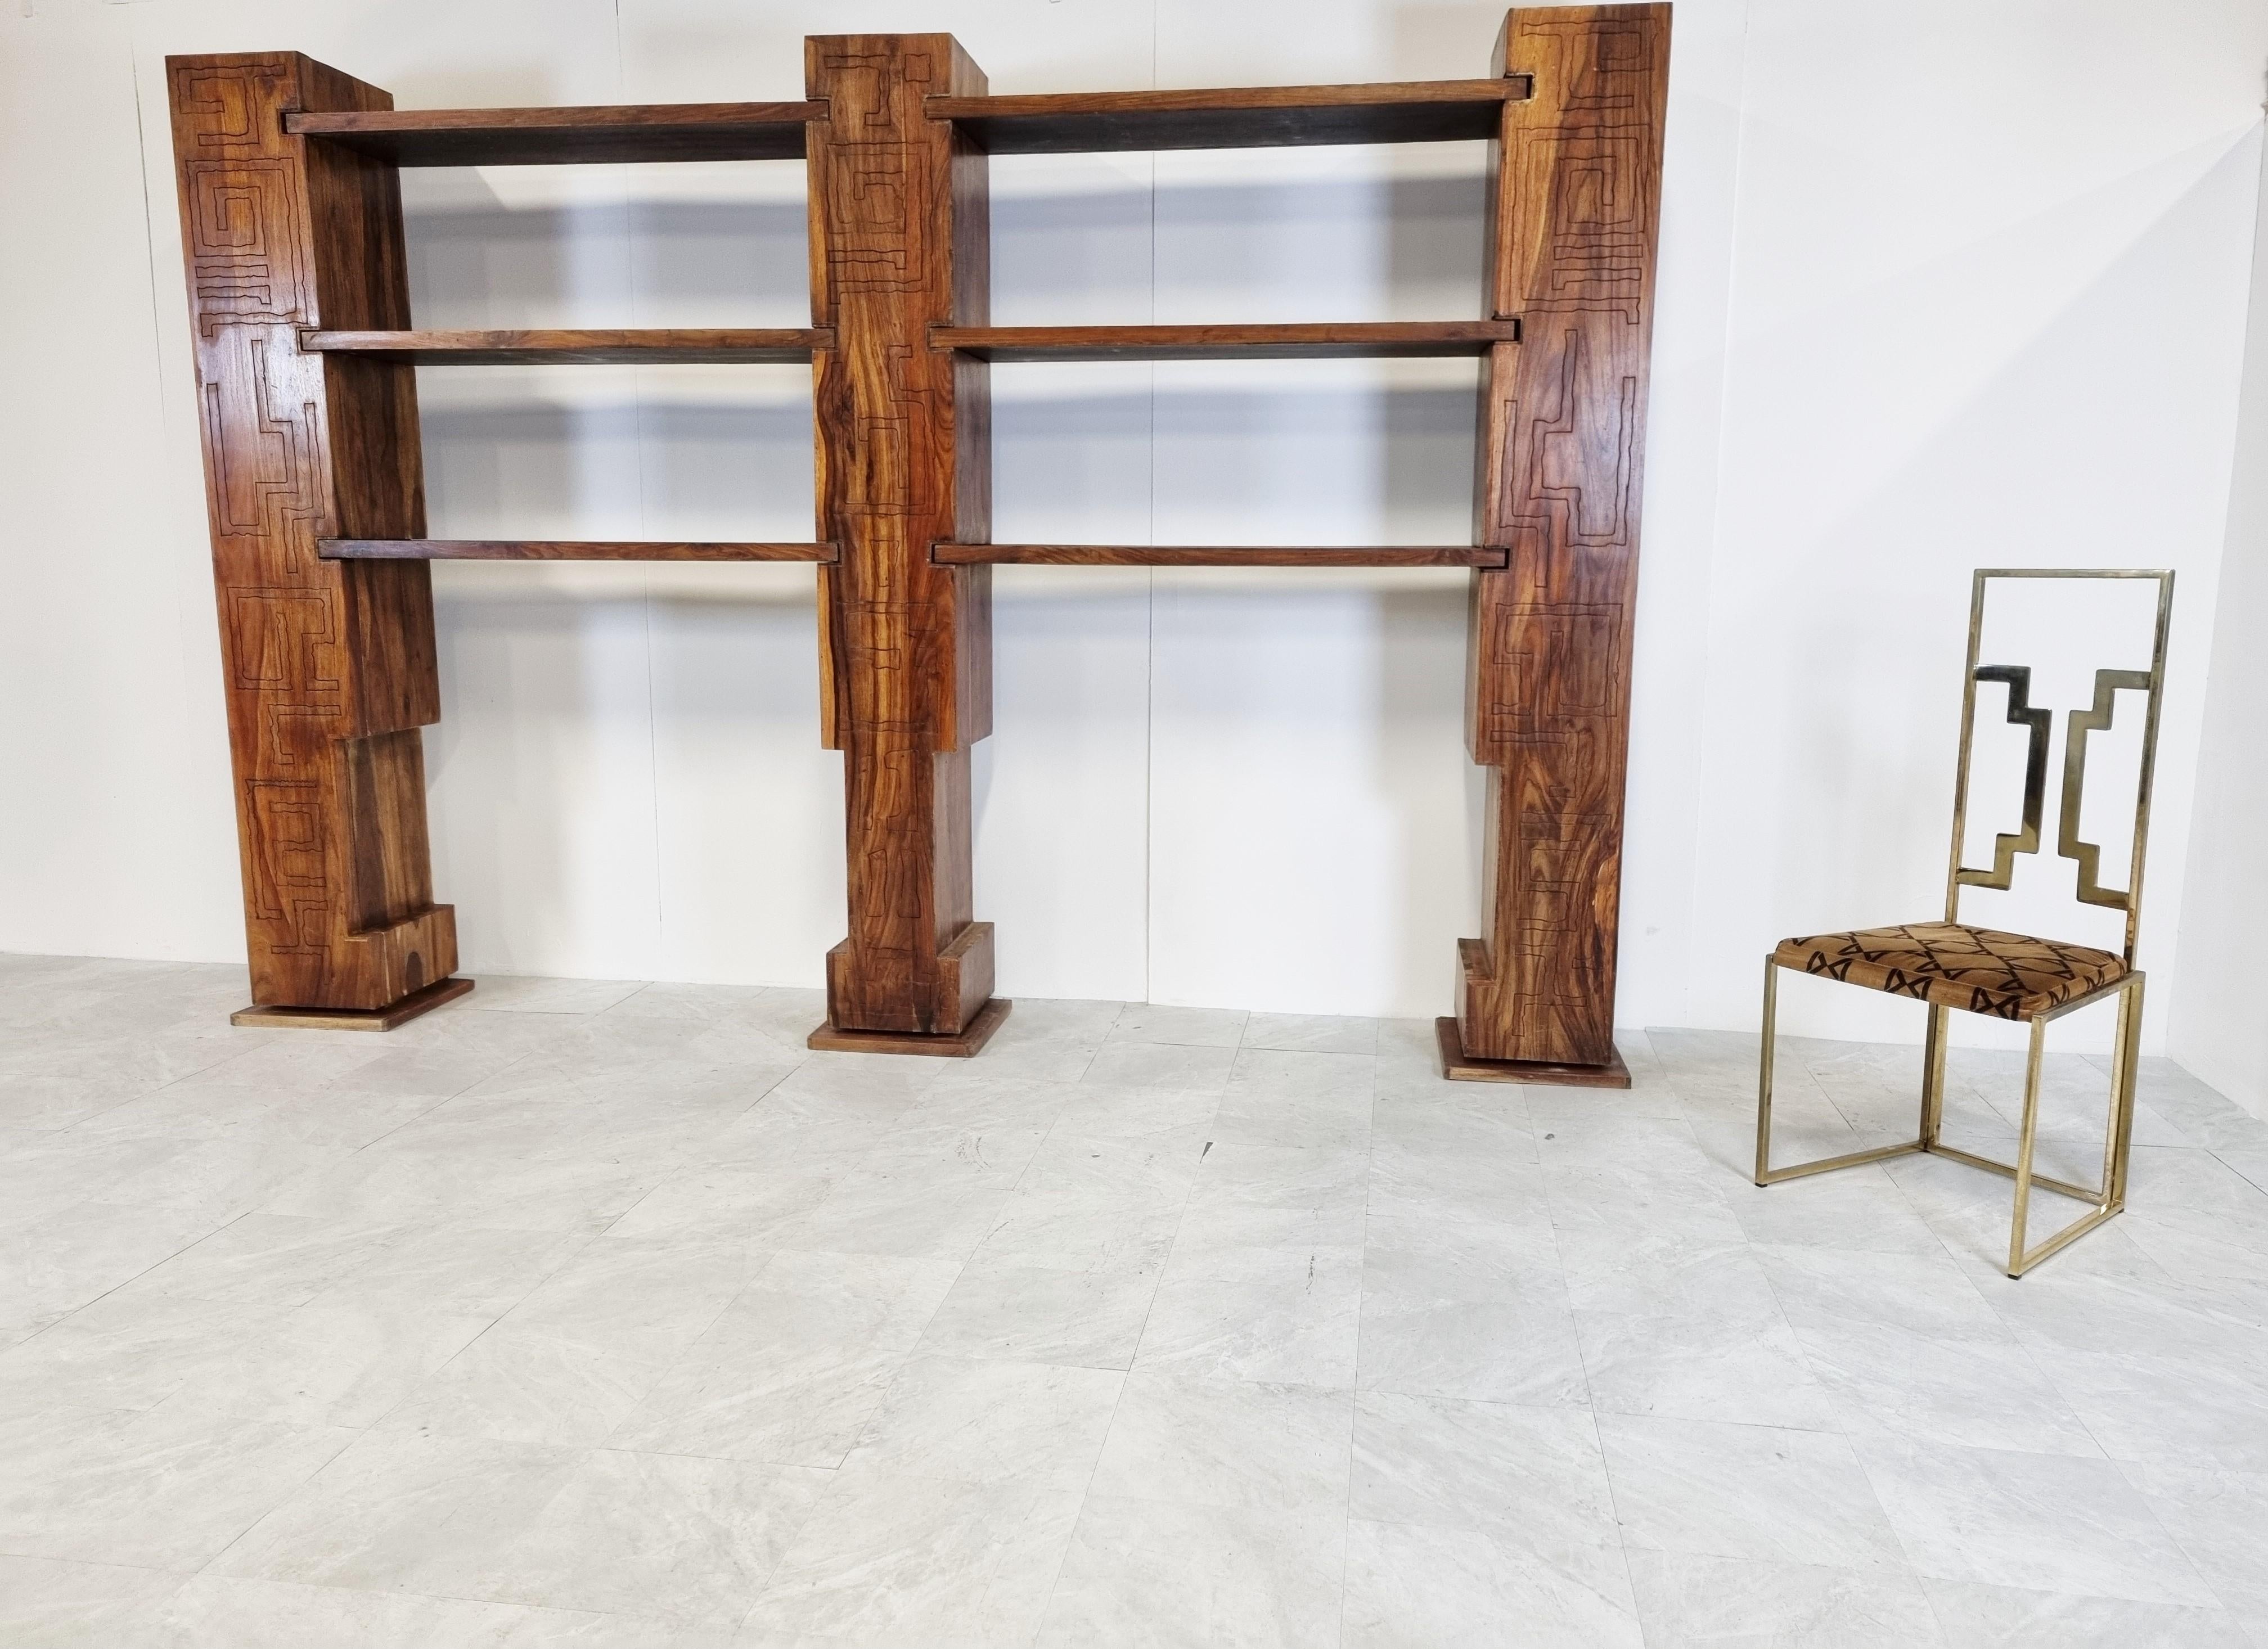 Solid wood brutalist wall unit or book case in the style of Paul Evans.

The wall unit is freestanding and consists out of 3 carved wooden stands from which two have doors and interlocking shelves offering plenty of storage space.

1960s -